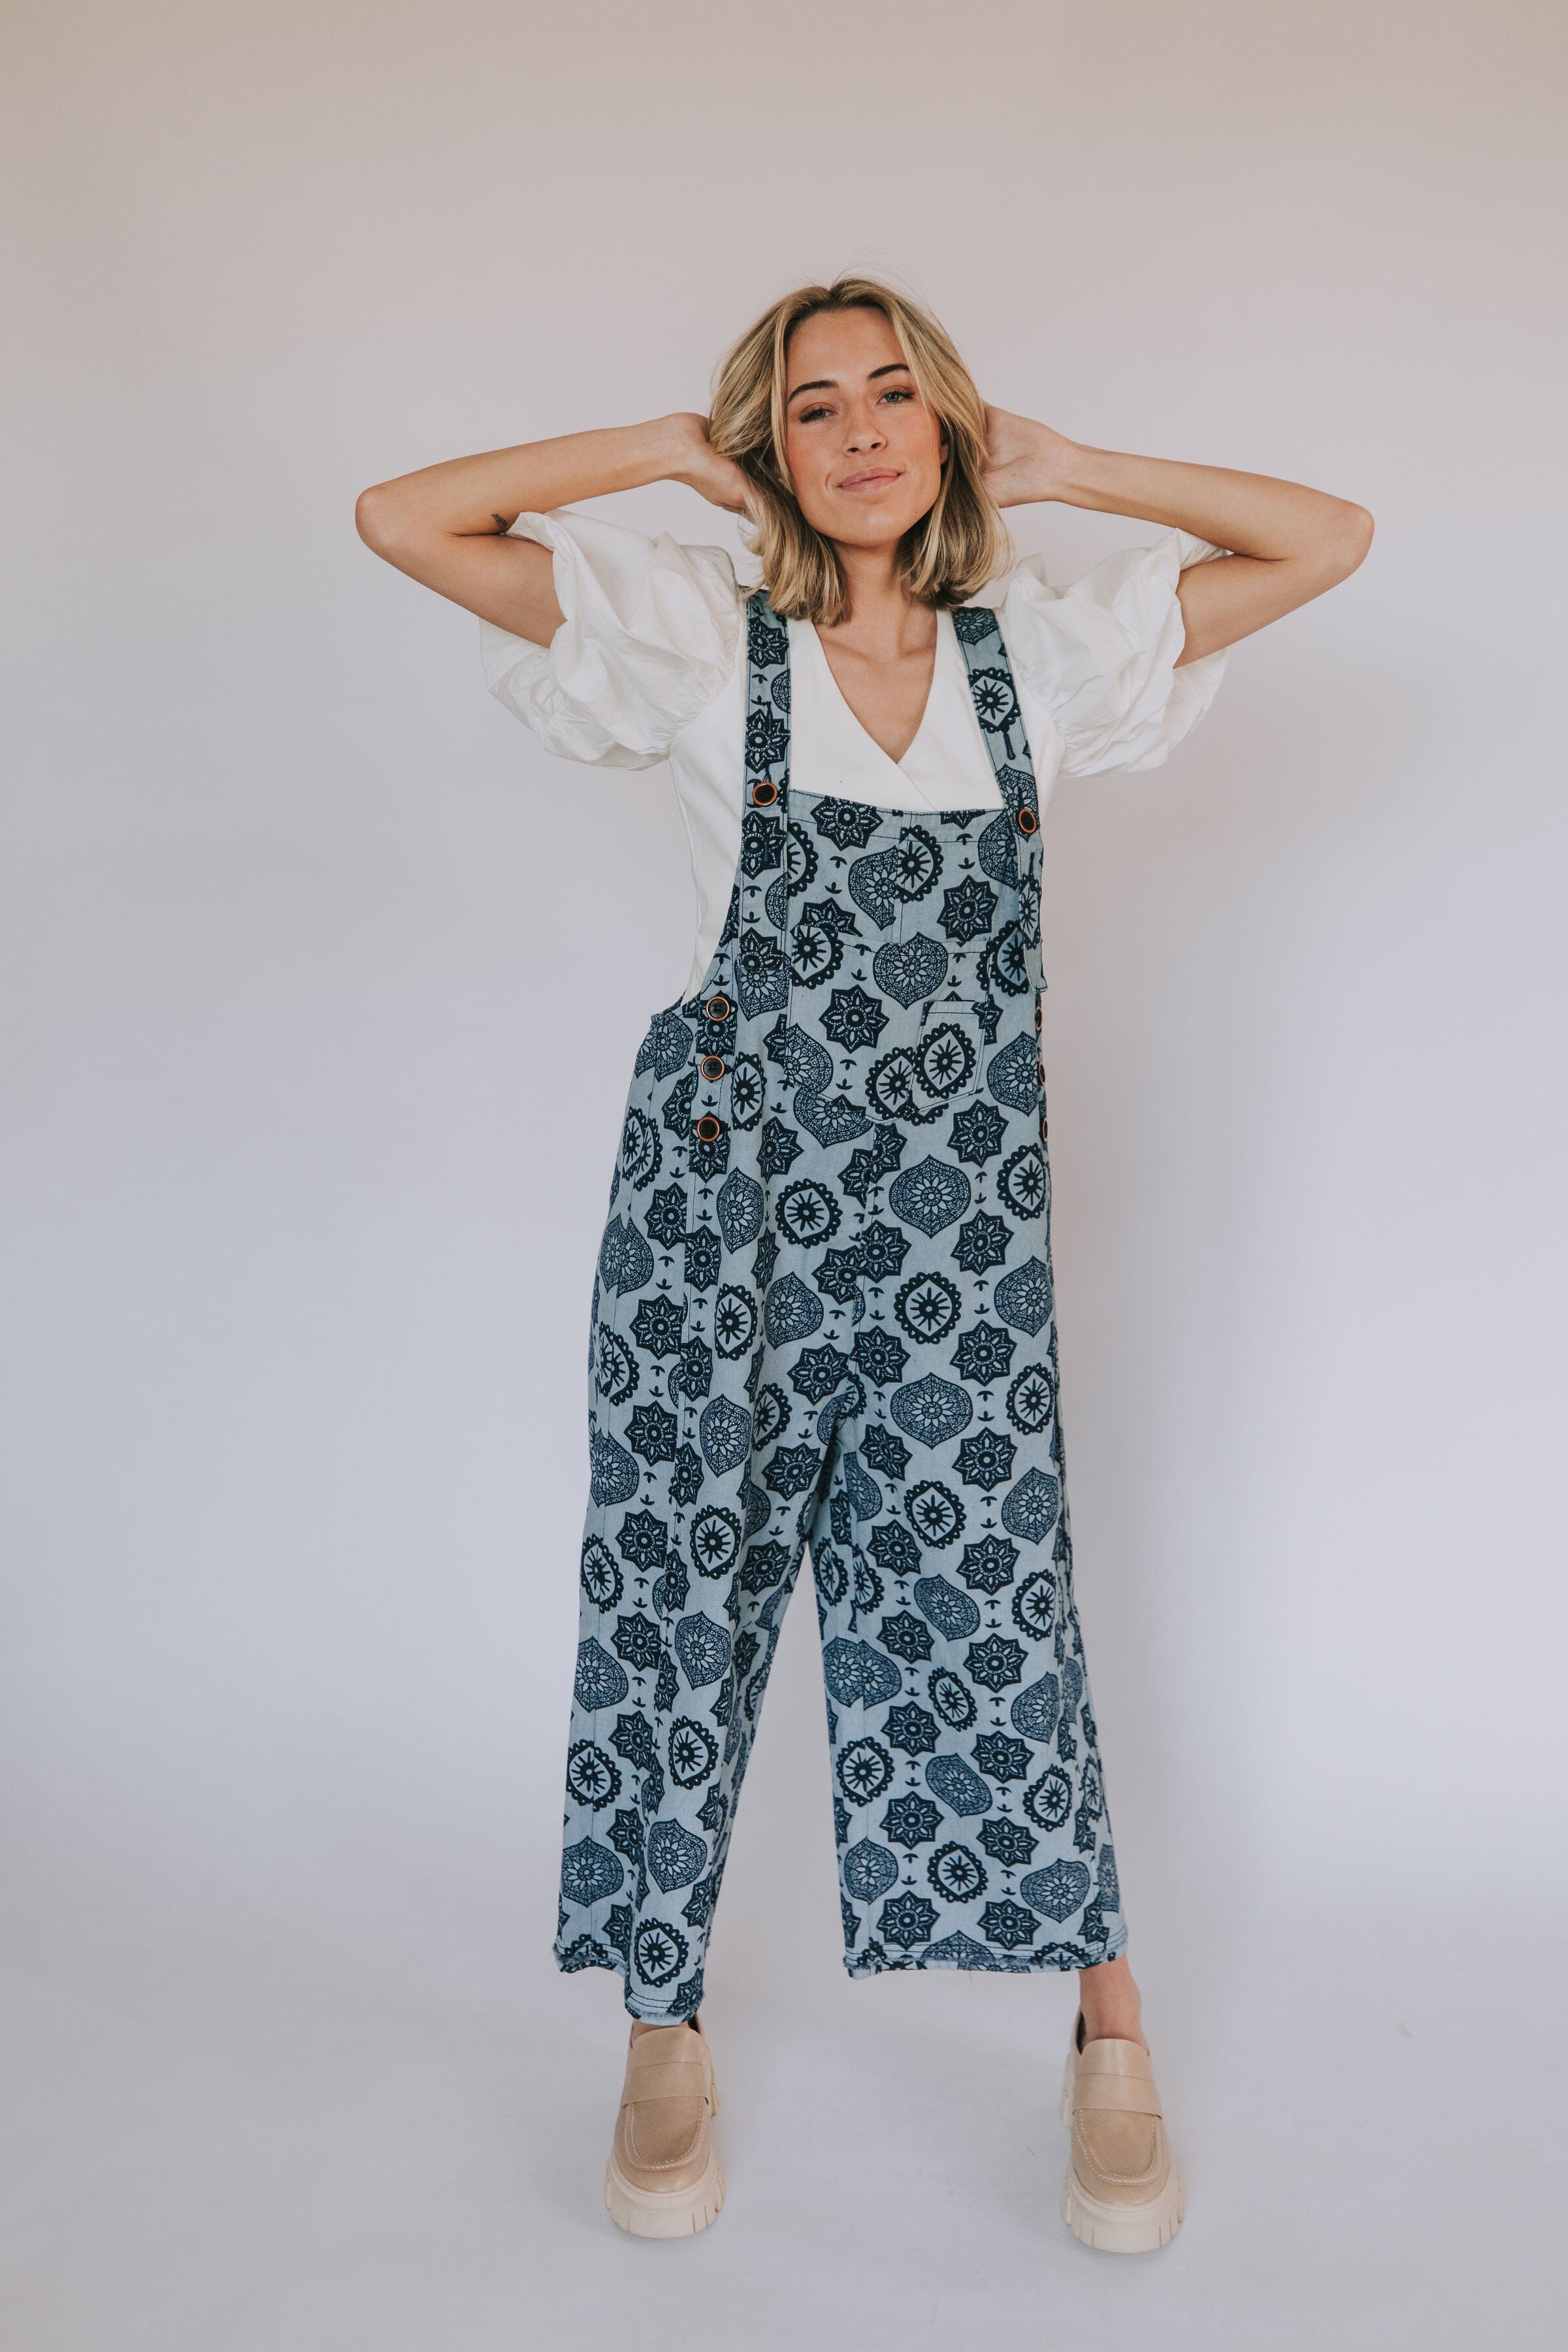 Lonnie Overalls - 2 Colors!